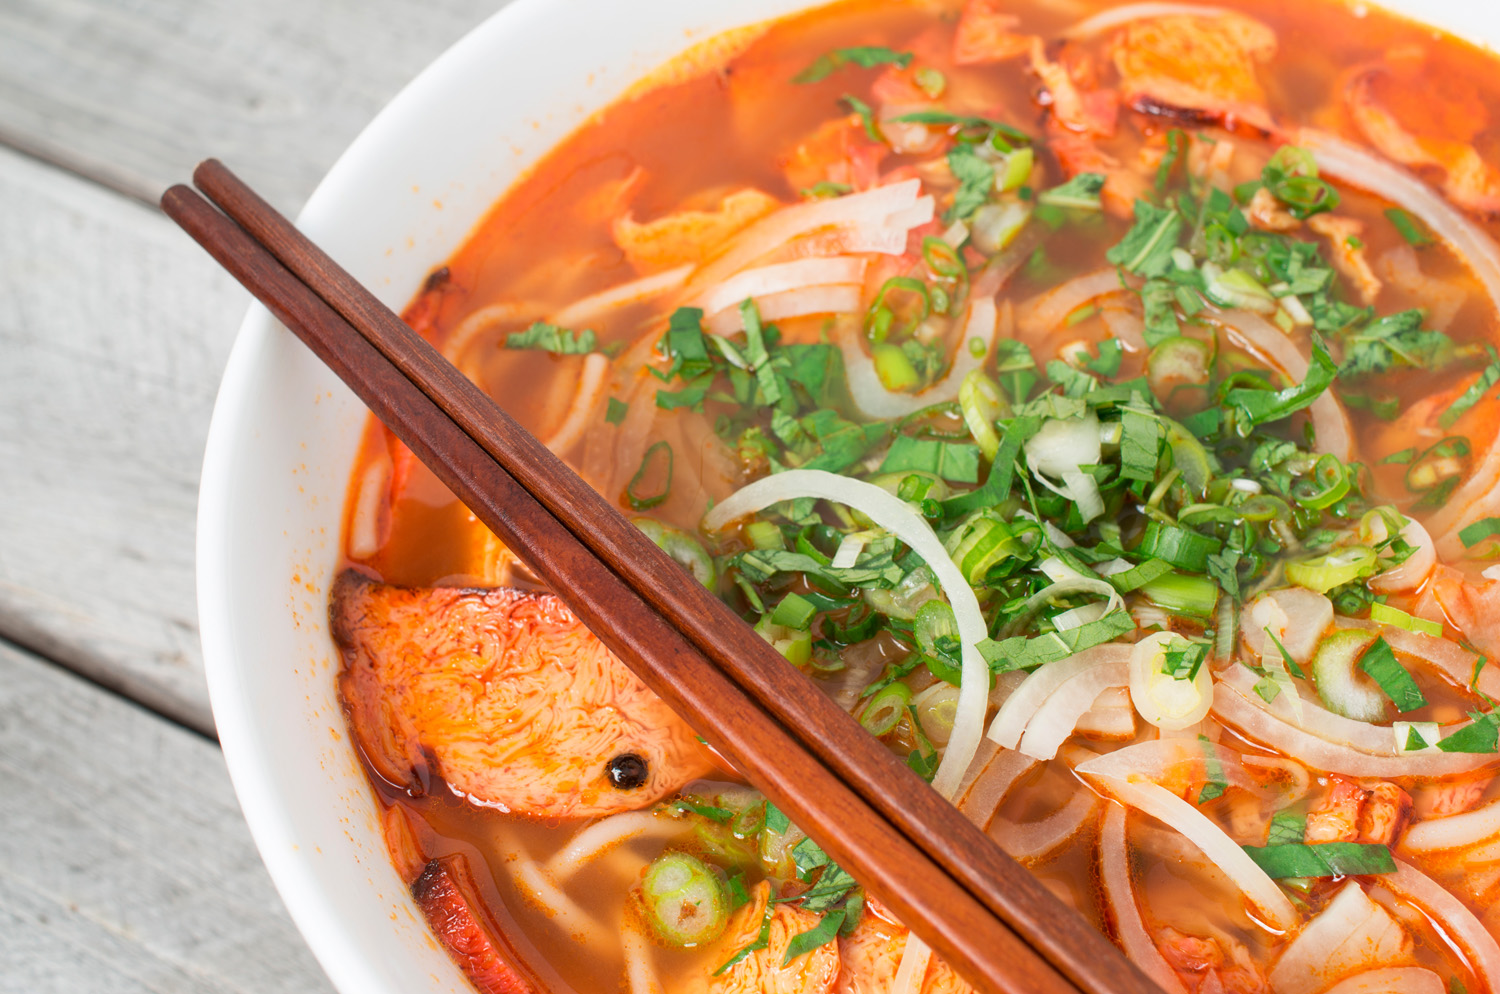 Vegetarian central Vietnamese hot and spicy soup with a pair of chop sticks, Bun Bo Hue chay